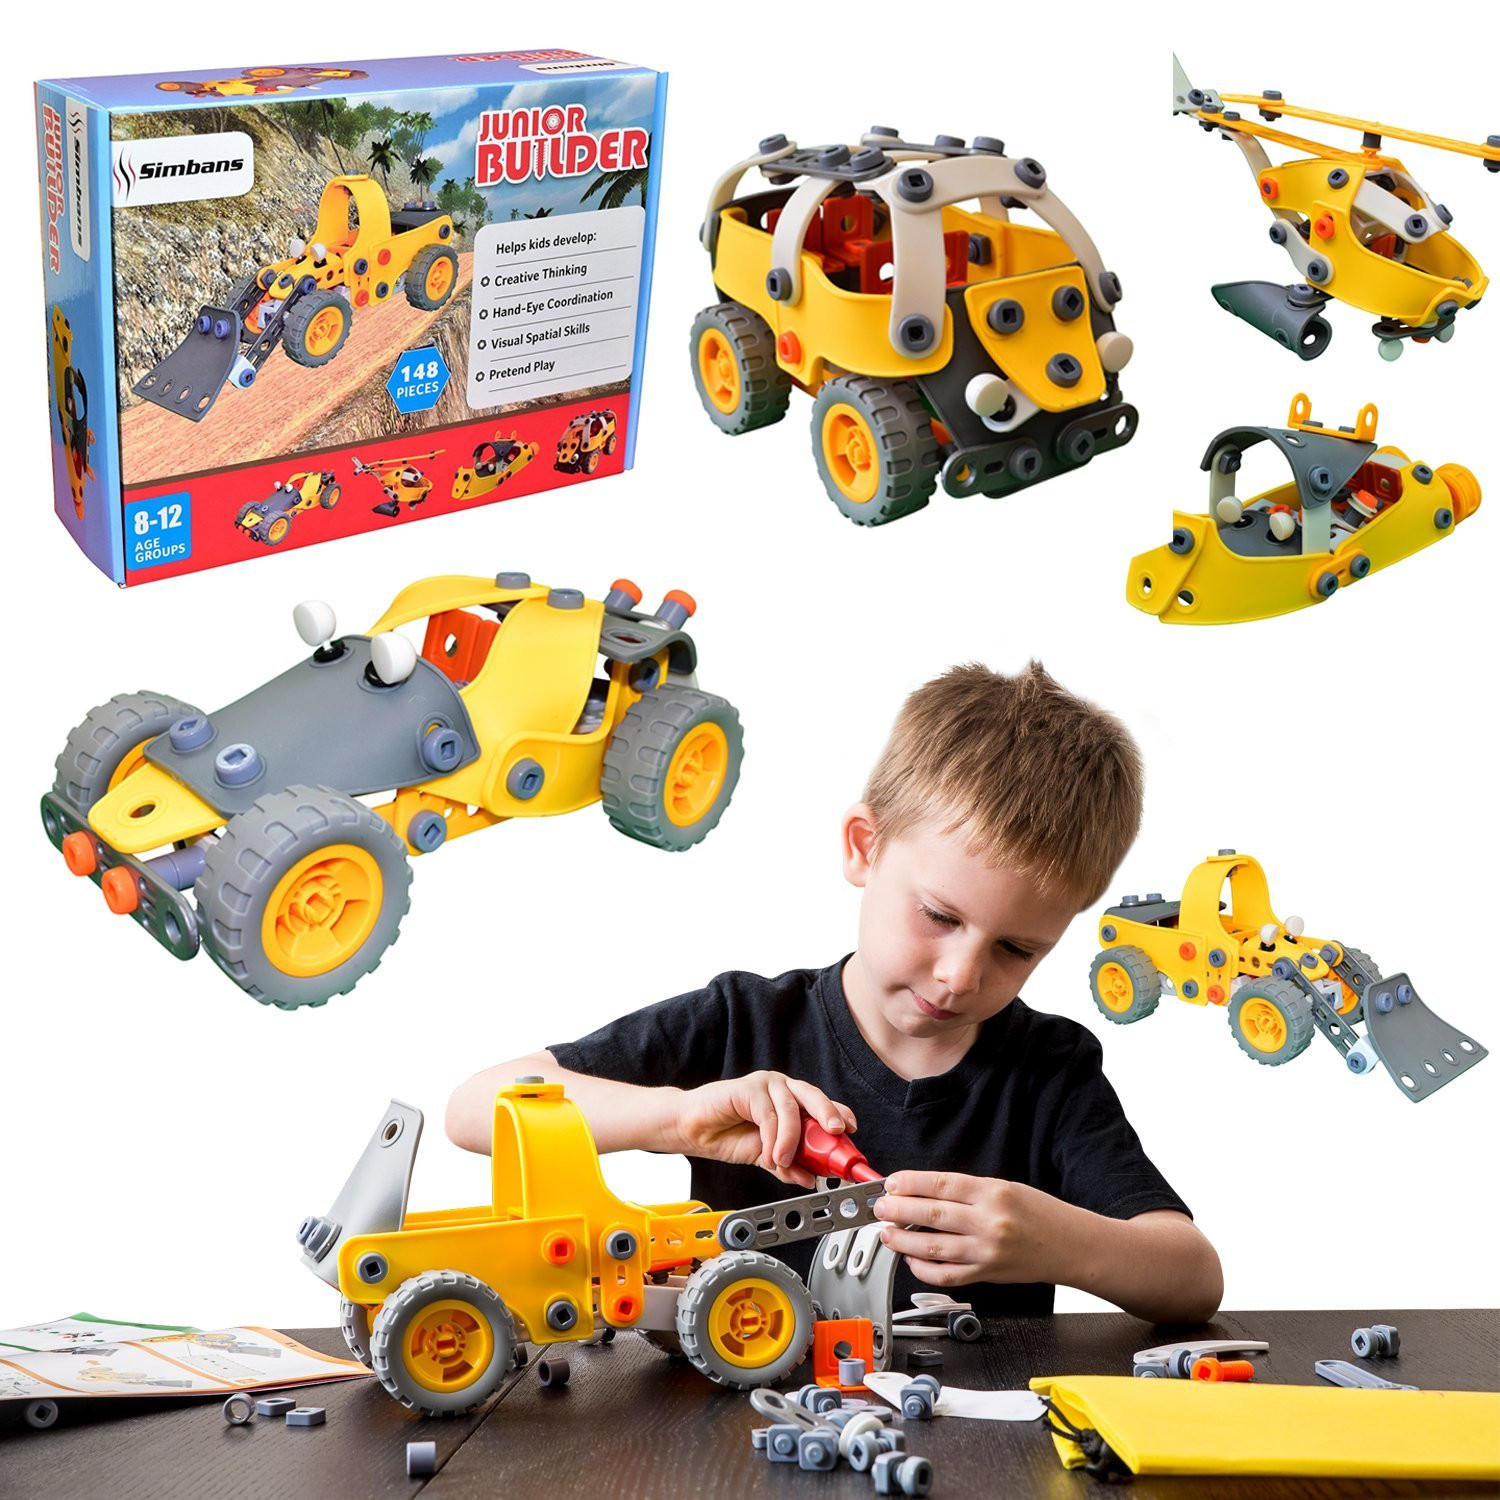 Birthday Gifts For 5 Year Old Boy
 35 Awesome Birthday Gifts For 5 Year Old Boy